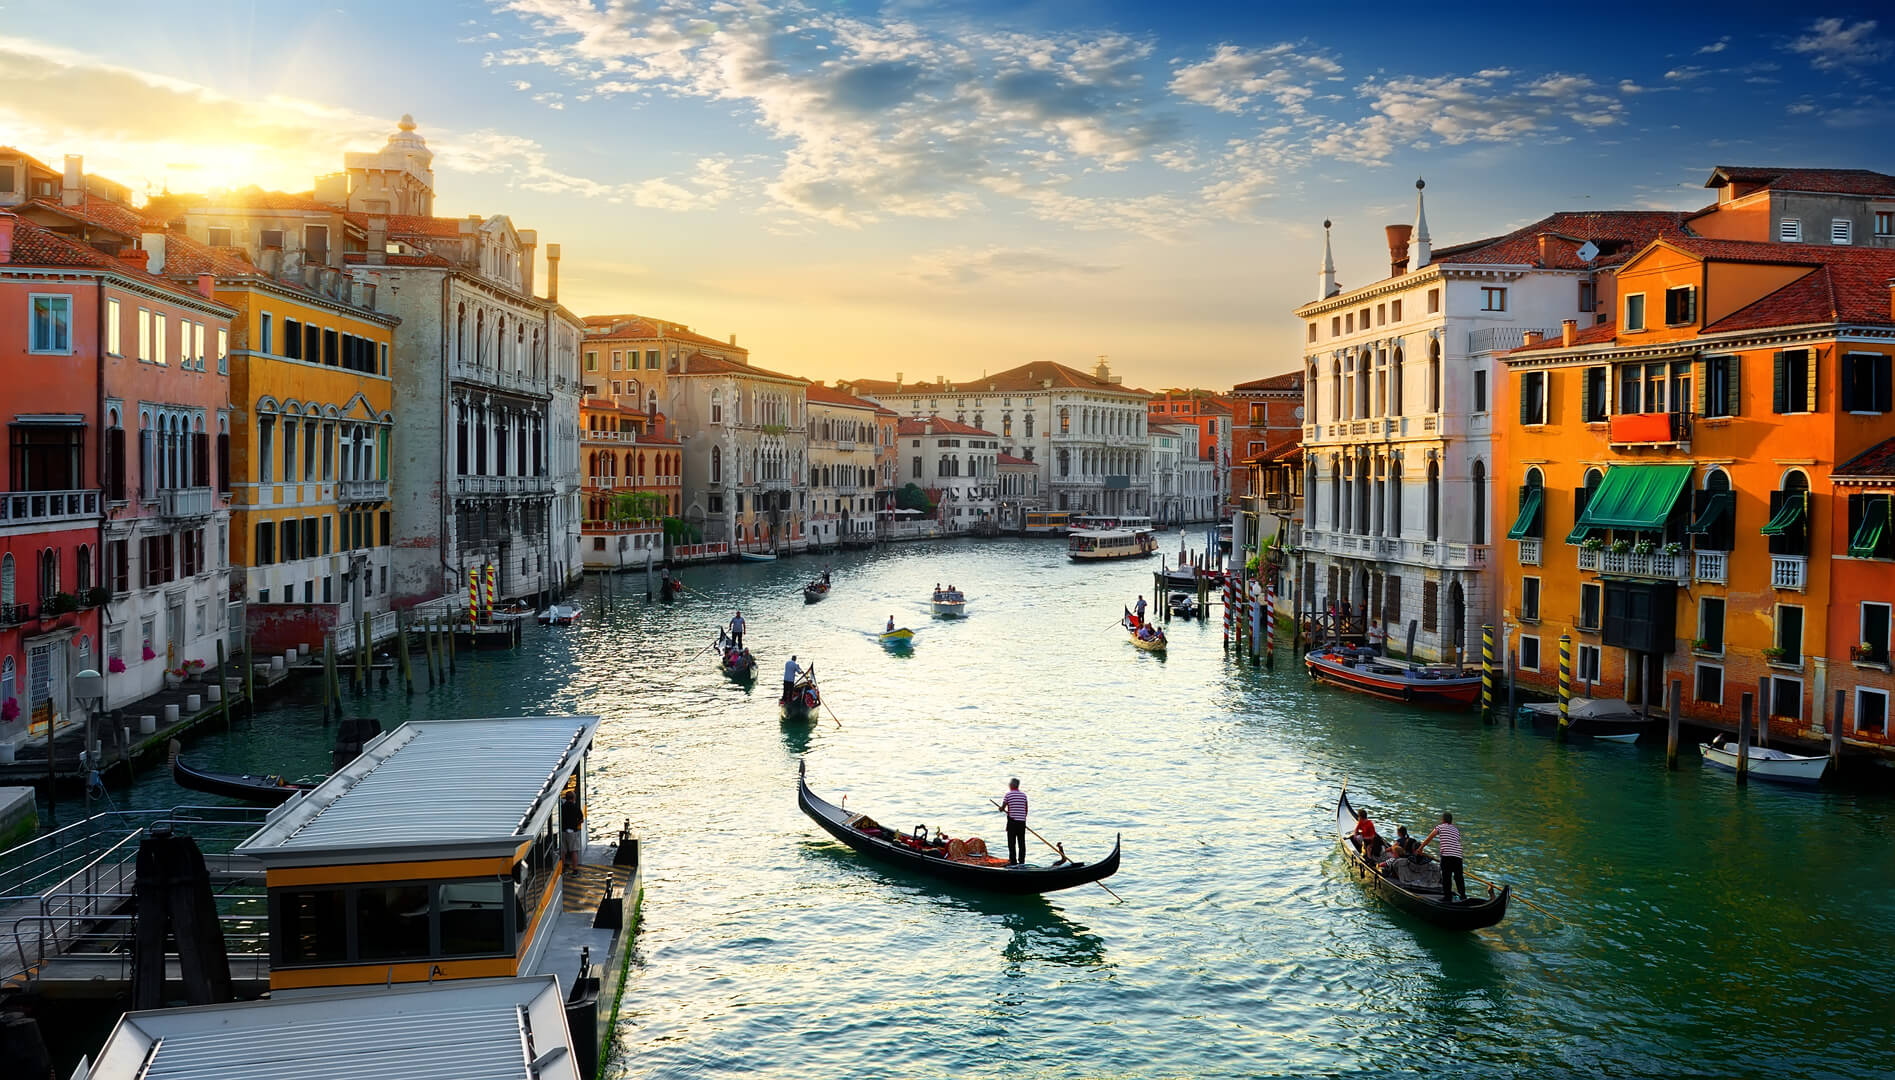 Grand Canal in Venice at the sunset, Italy.